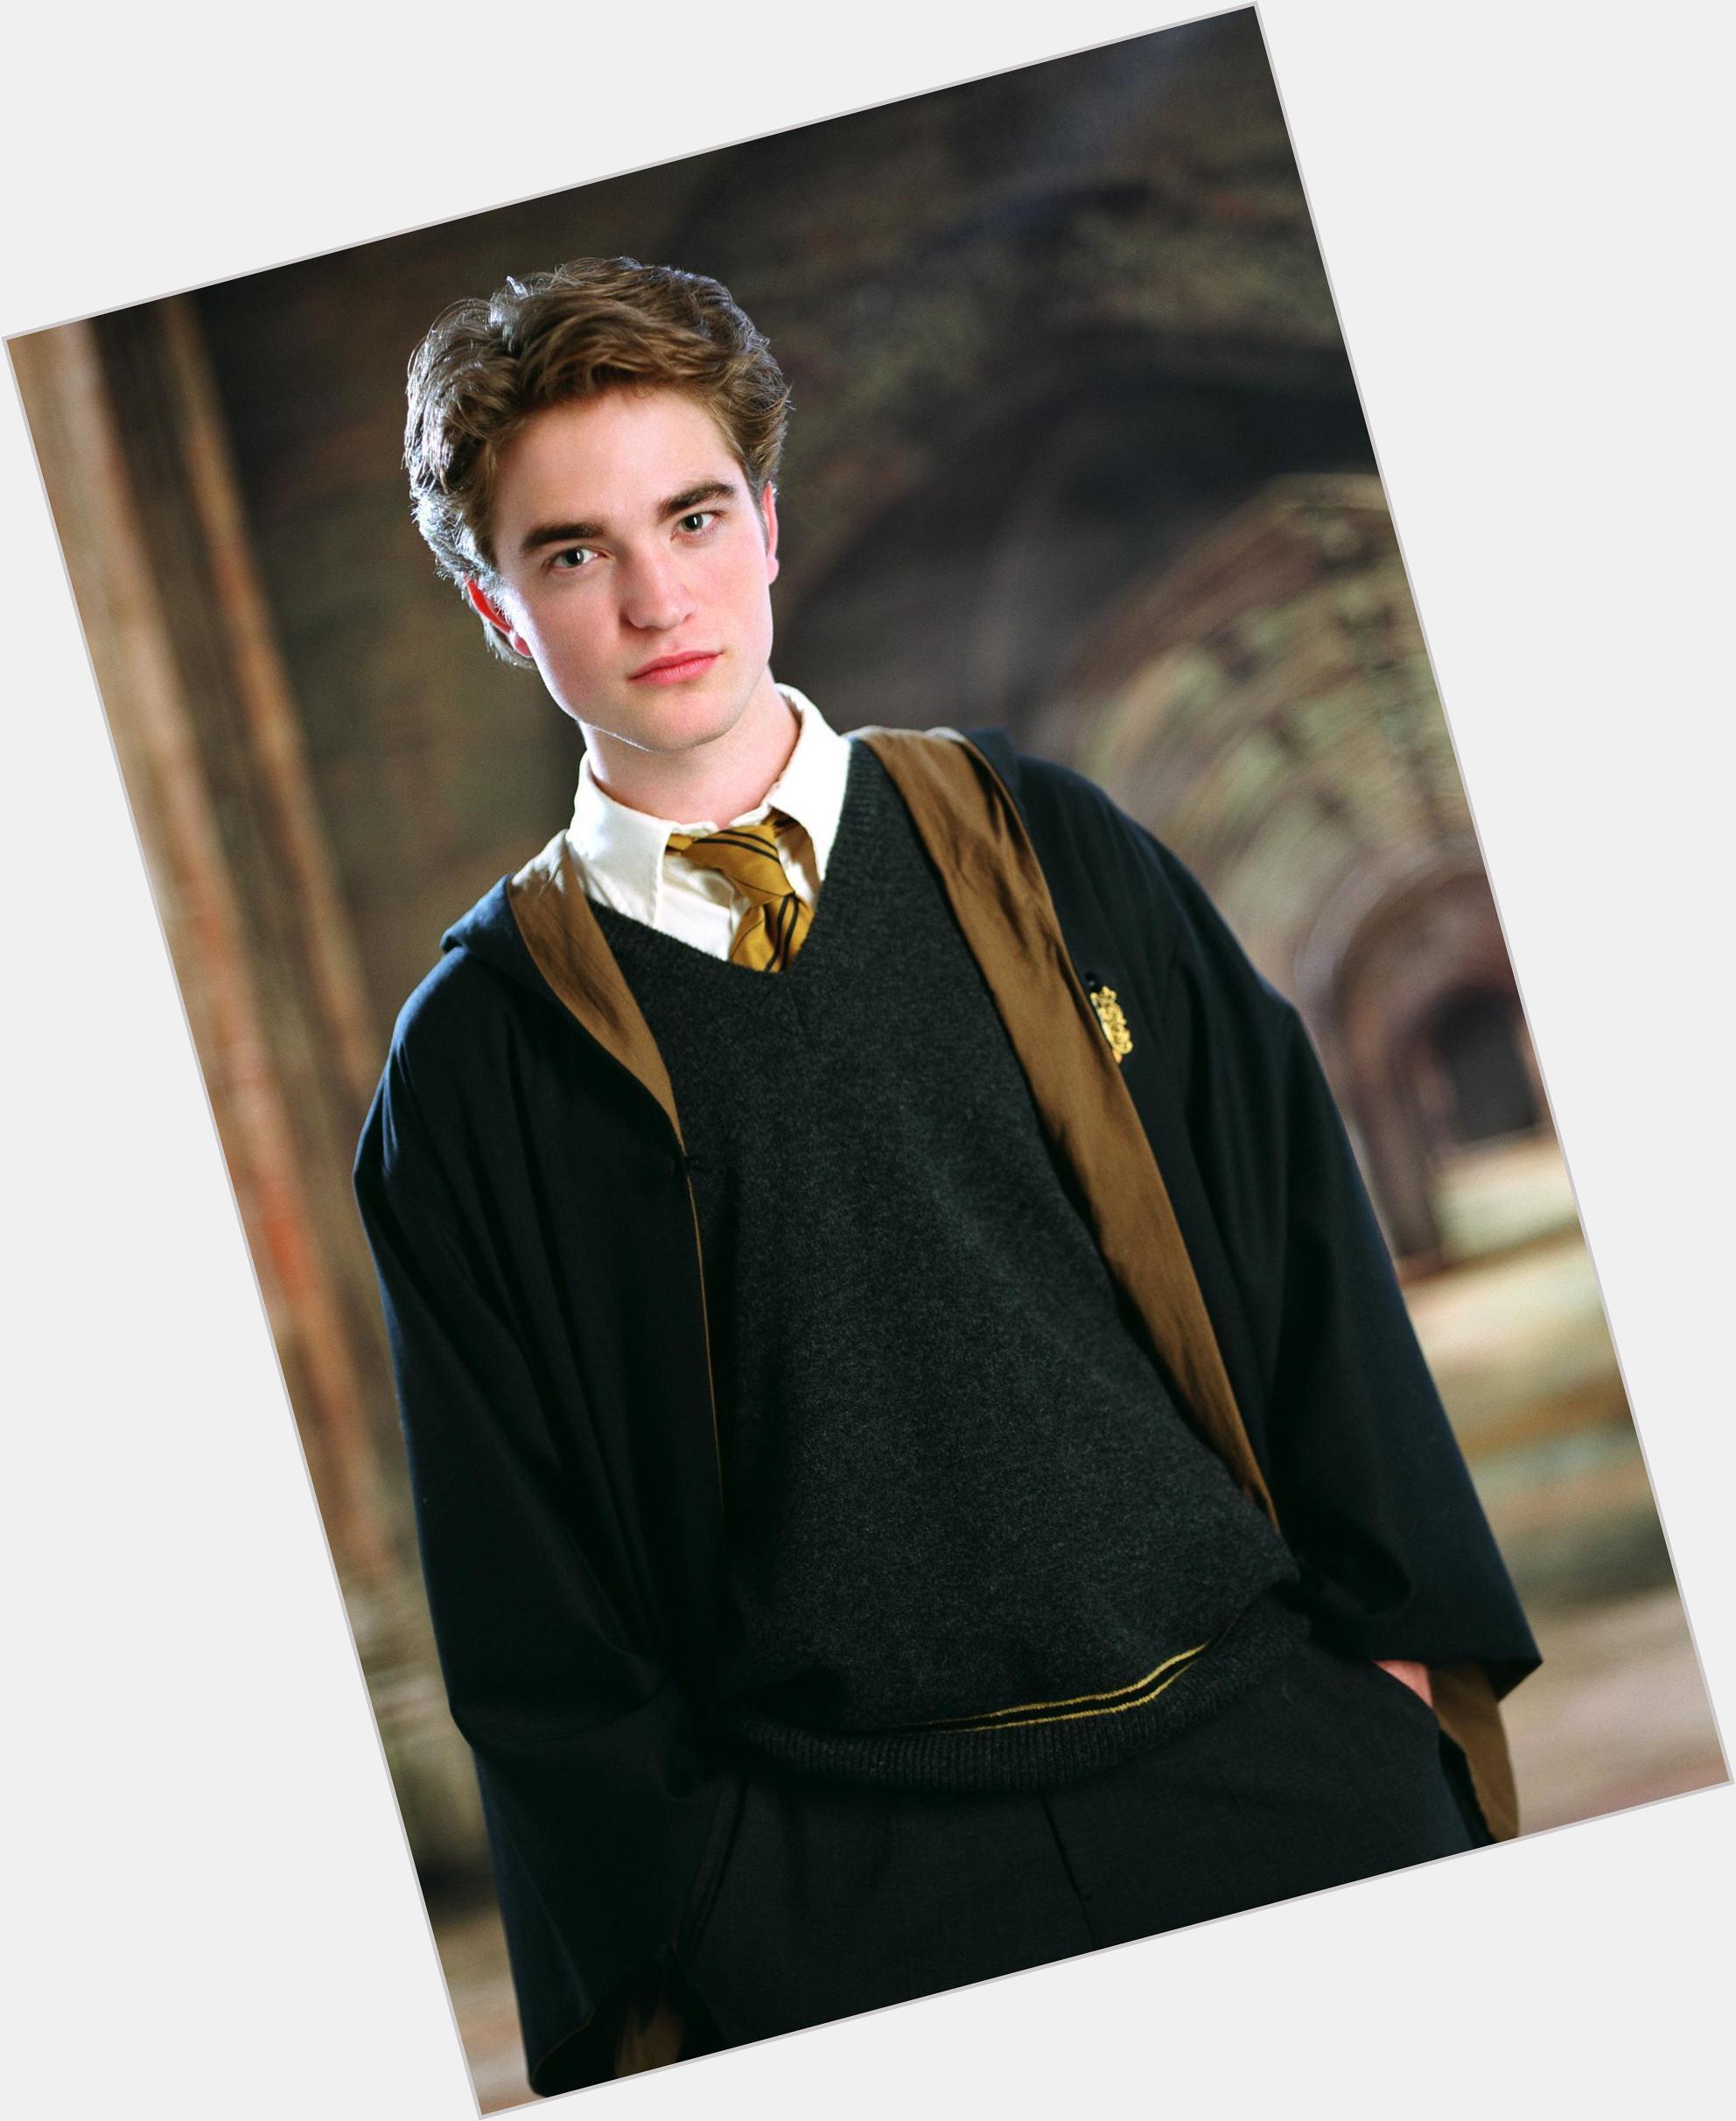 cedric diggory and harry potter 10.jpg